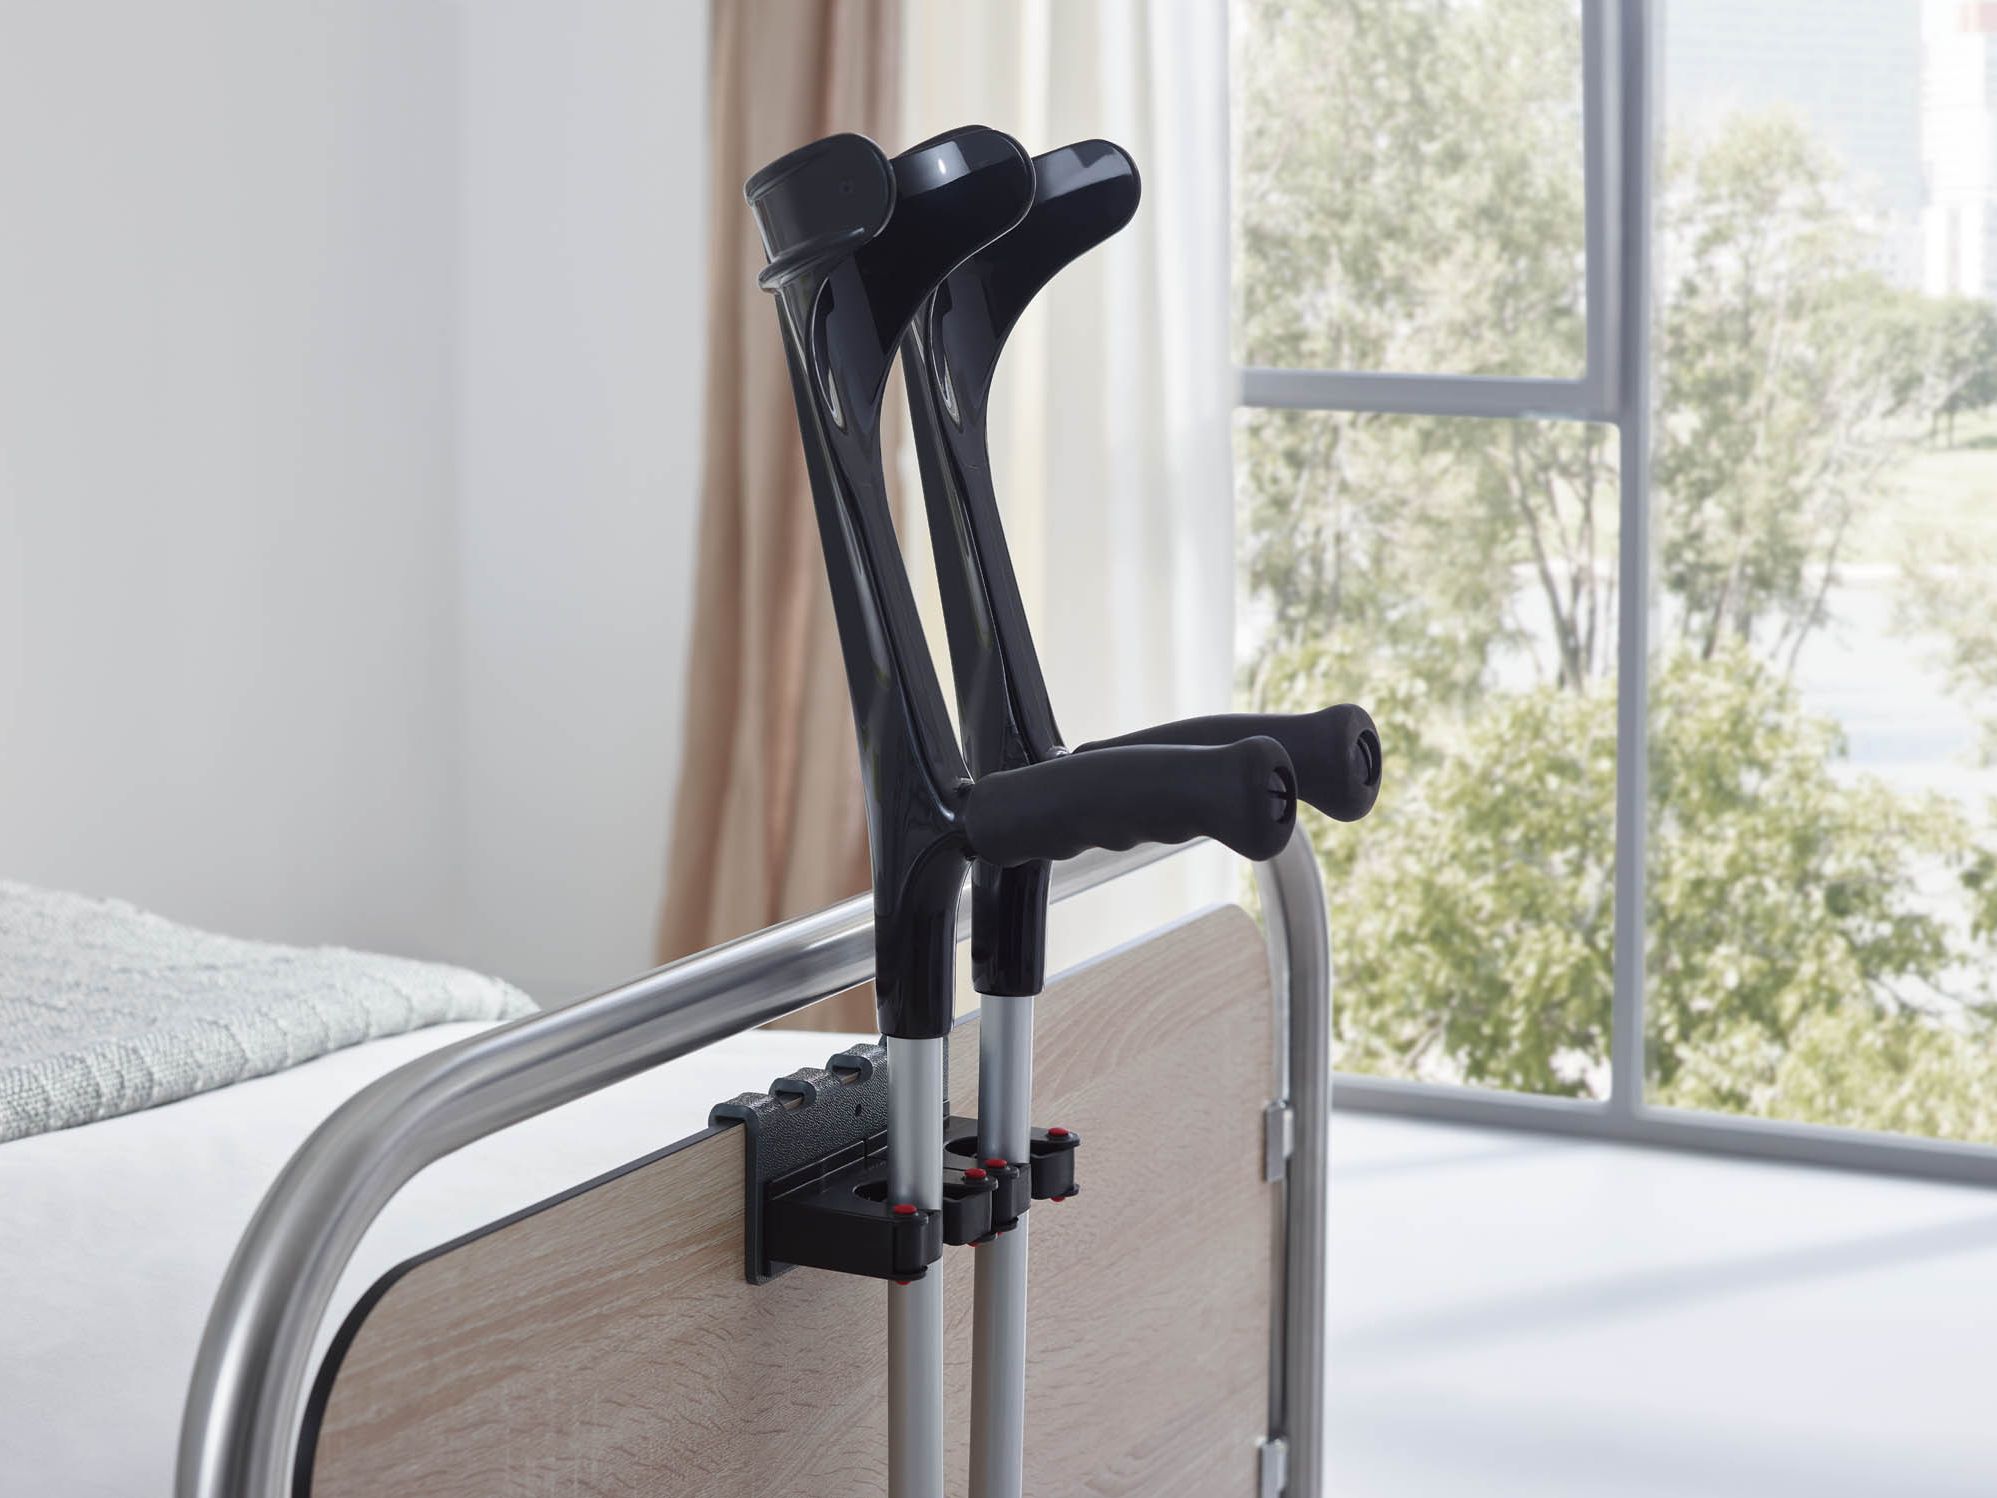 Crutch holders for beds and bedside lockers